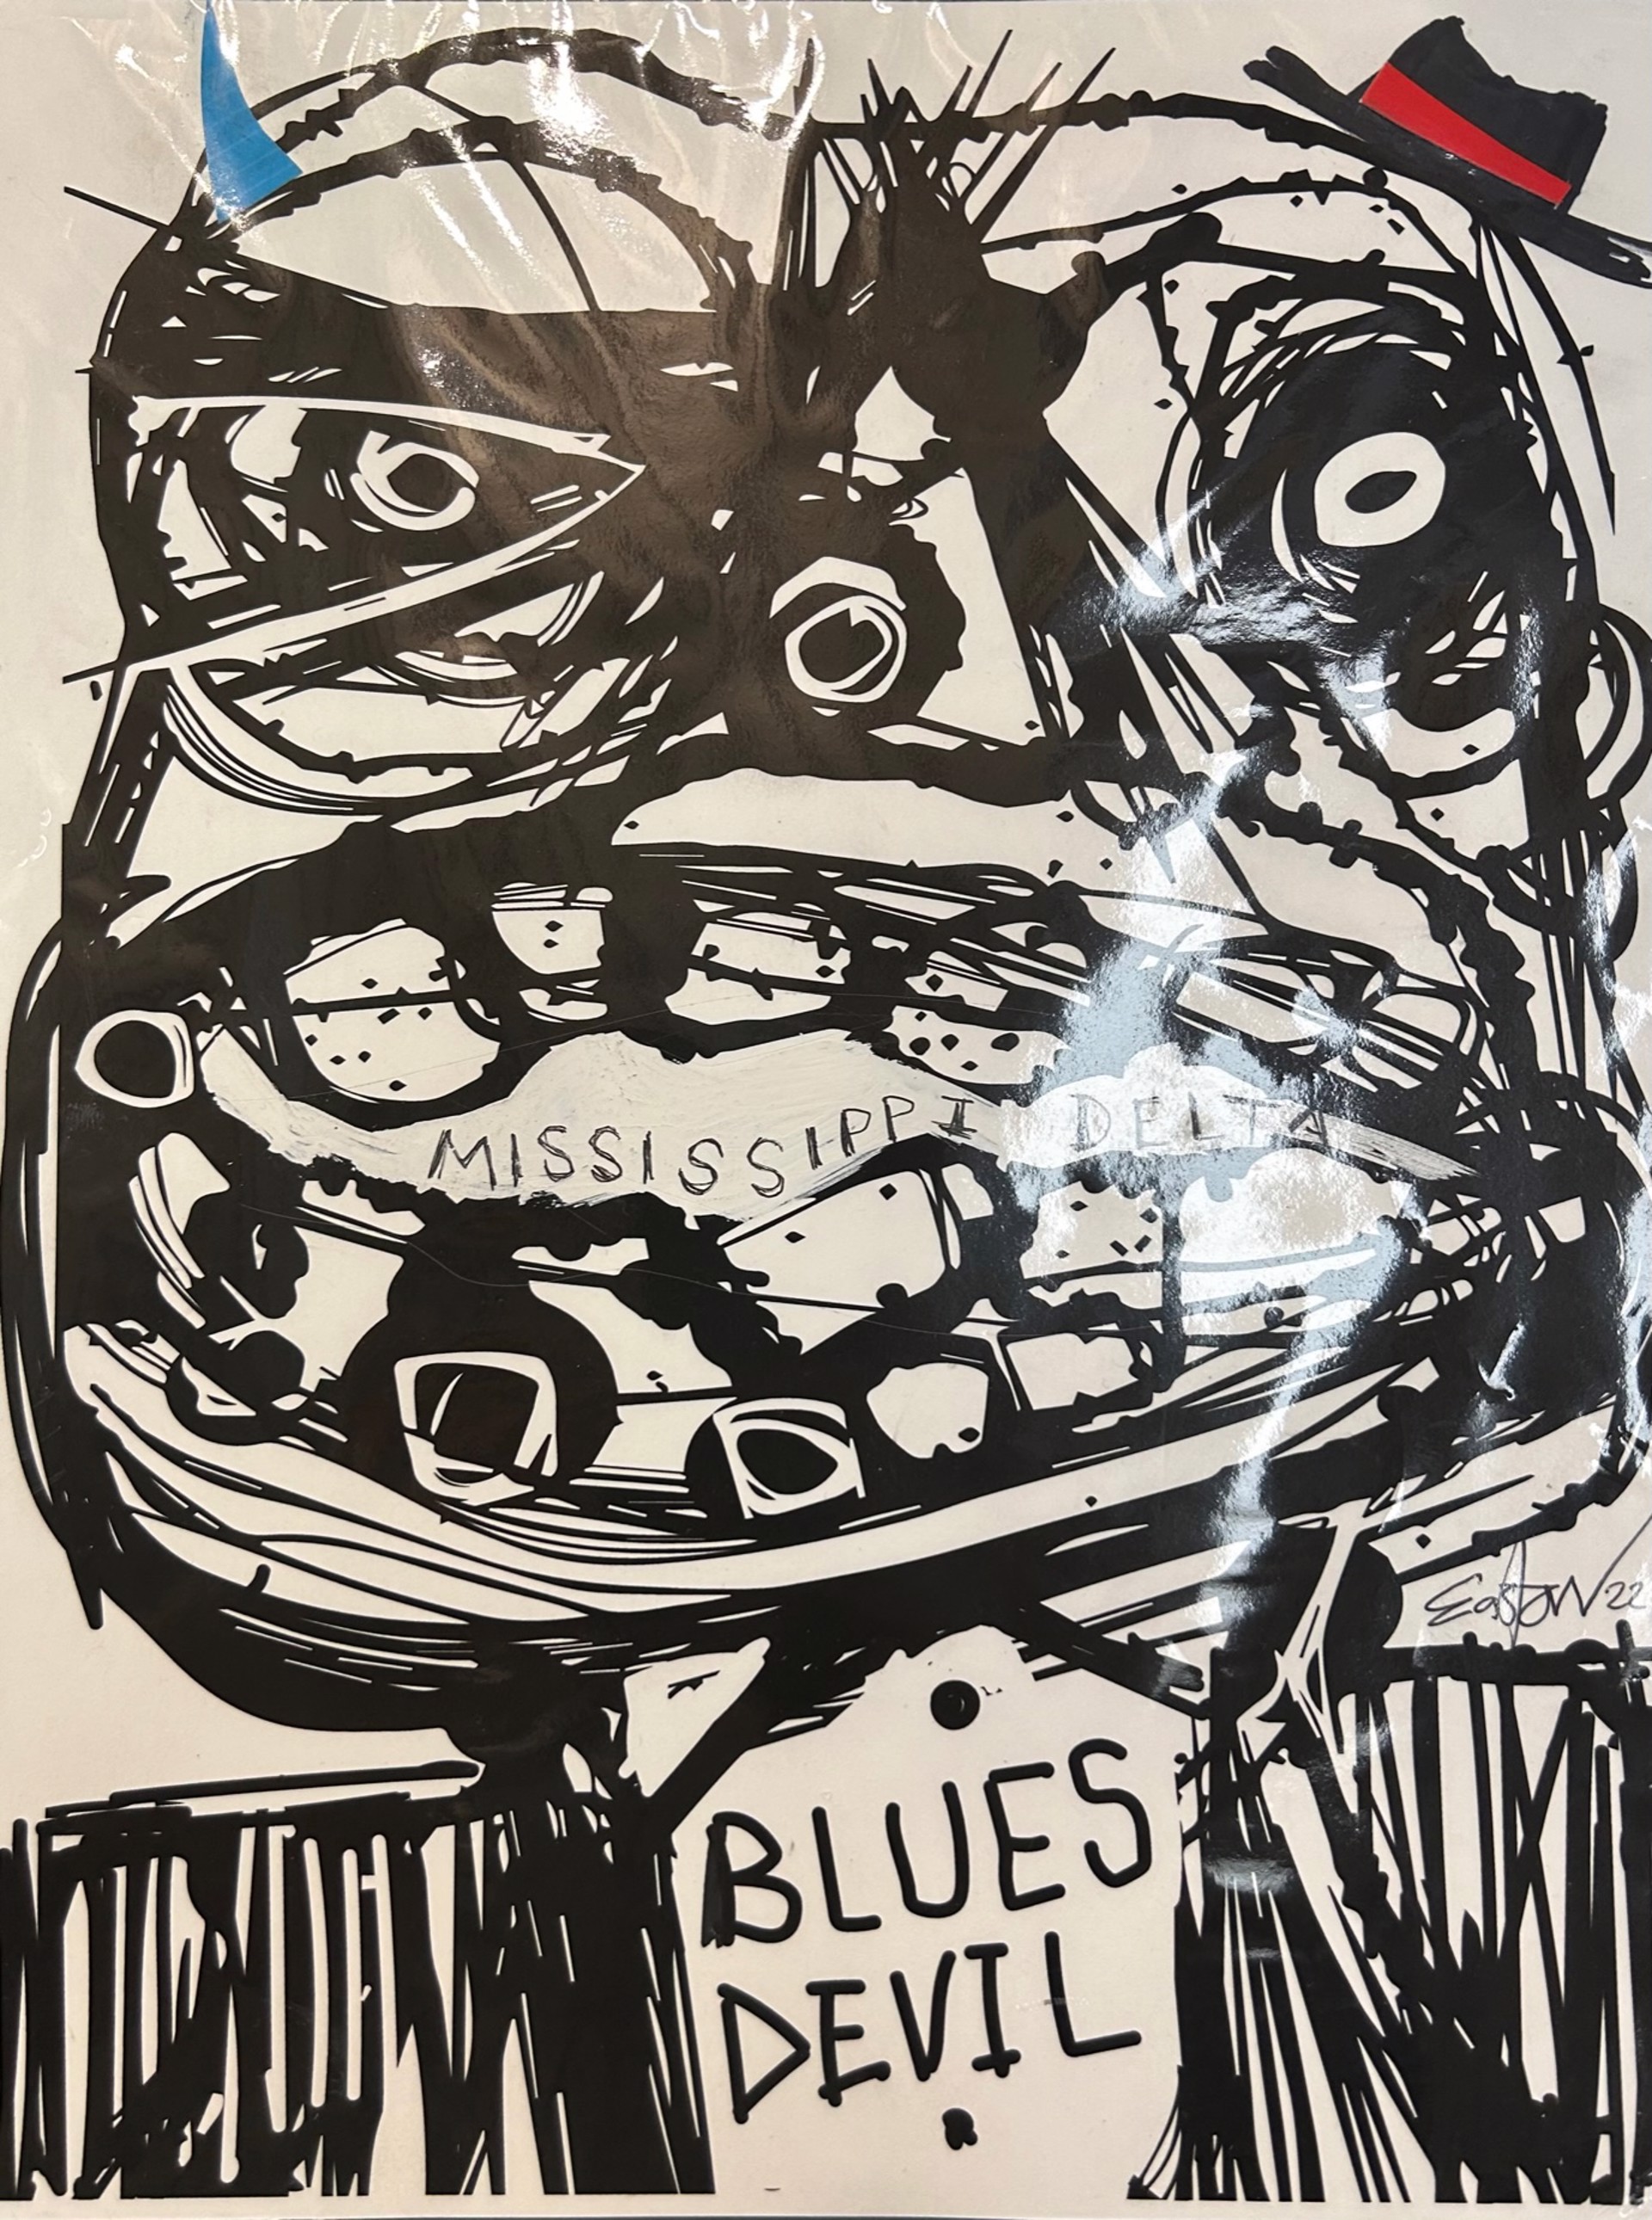 "The Blues Devil #1" by Easton Davy